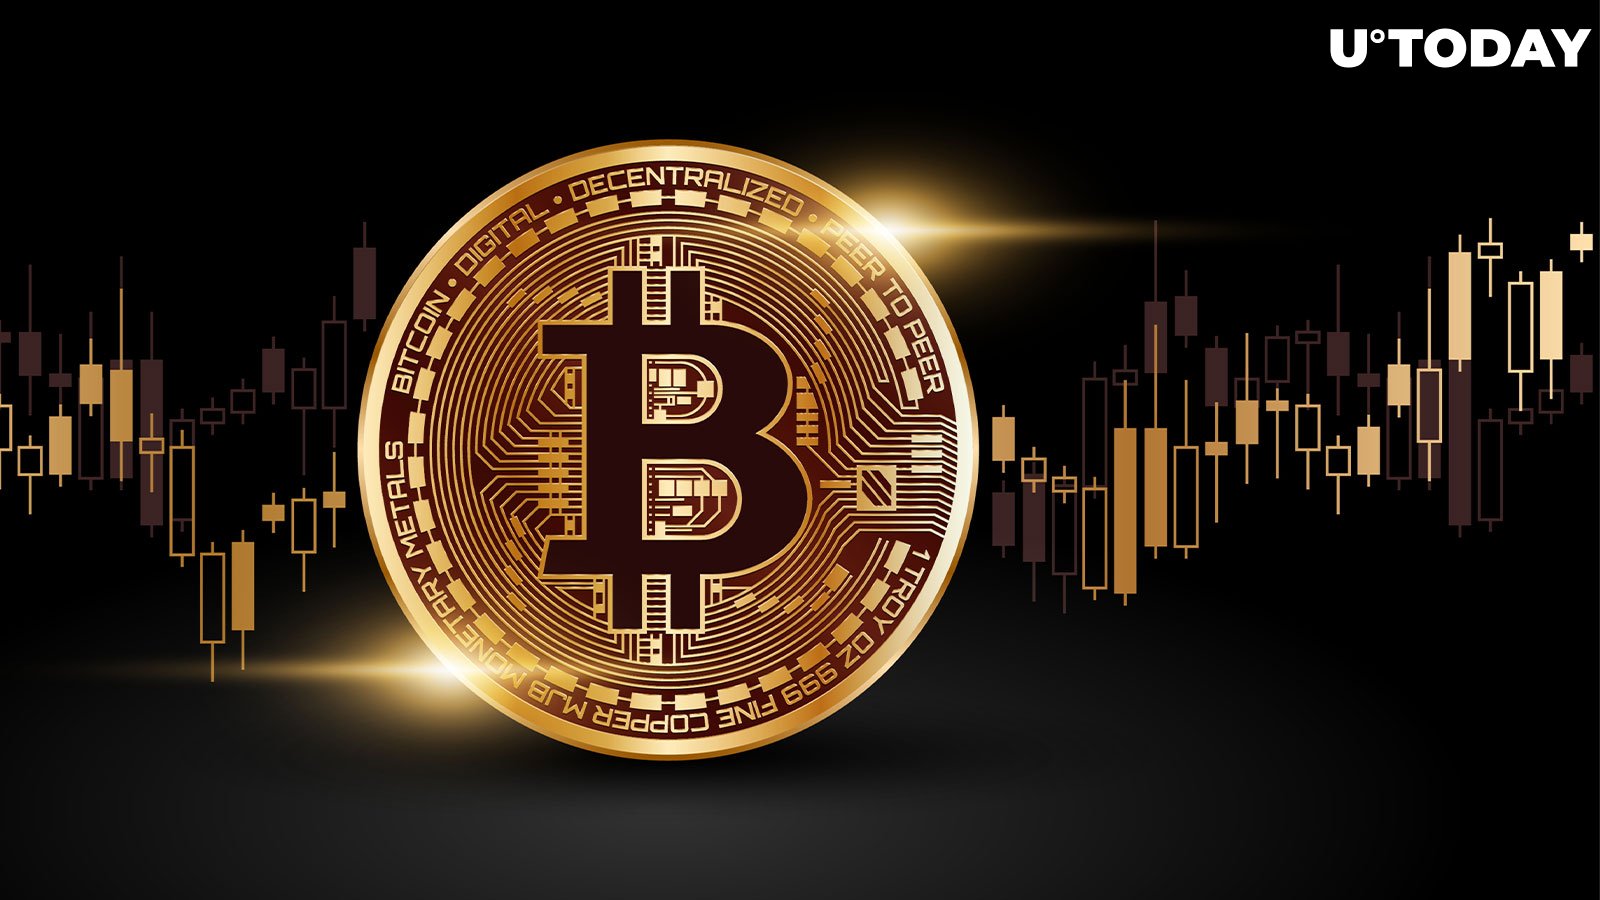 Bitcoin (BTC) Targeting $34,000 Following Strong Channel Breakout: Analyst